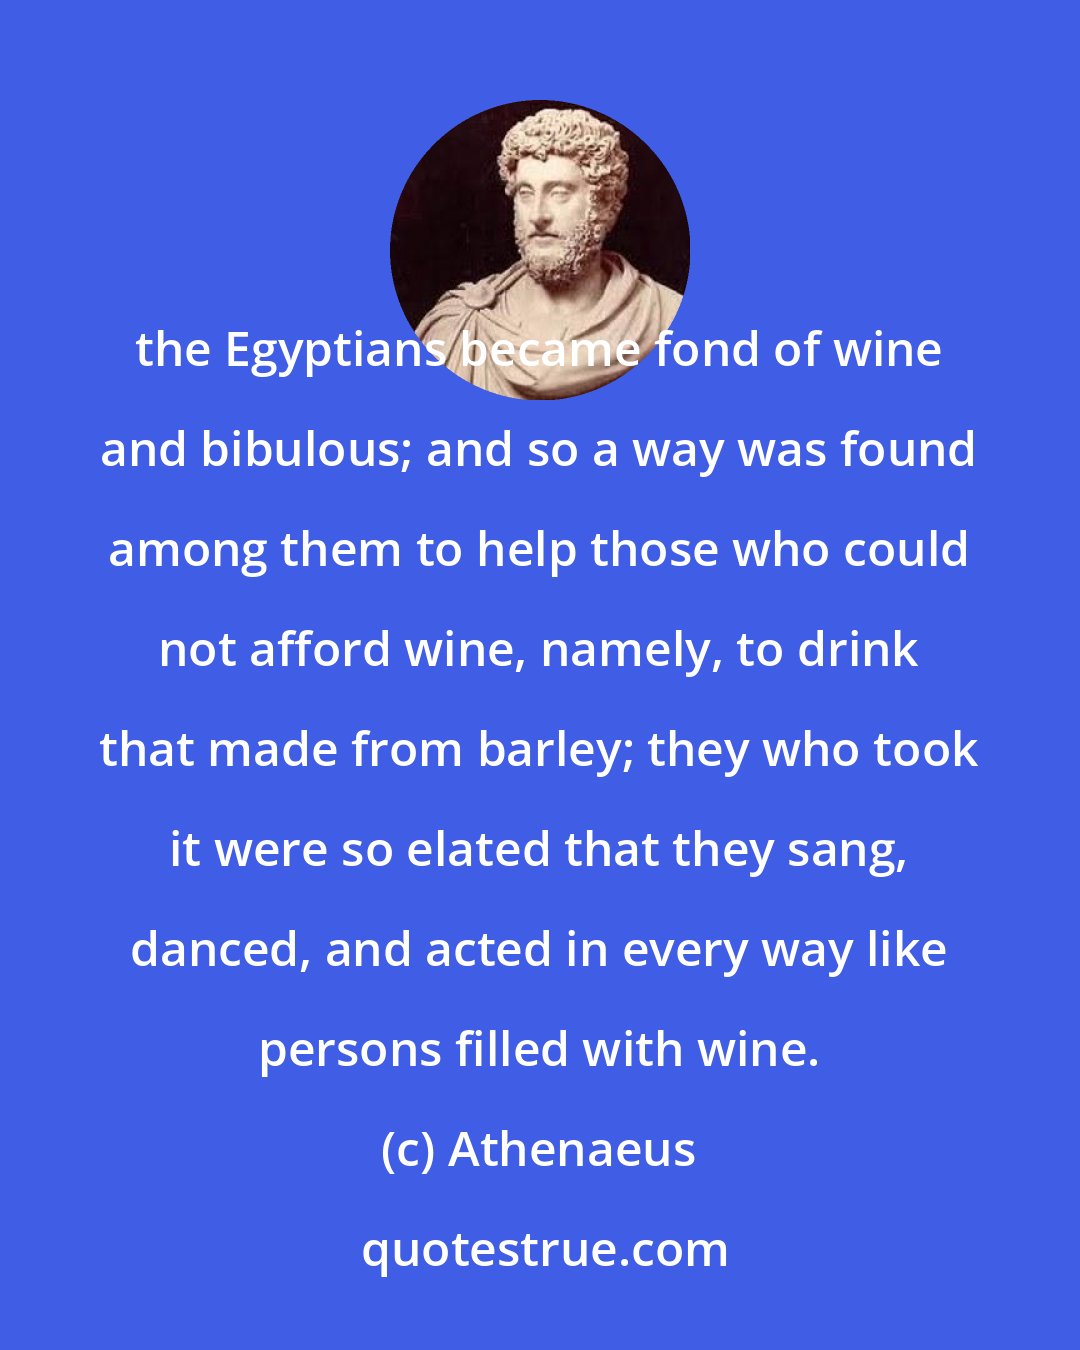 Athenaeus: the Egyptians became fond of wine and bibulous; and so a way was found among them to help those who could not afford wine, namely, to drink that made from barley; they who took it were so elated that they sang, danced, and acted in every way like persons filled with wine.